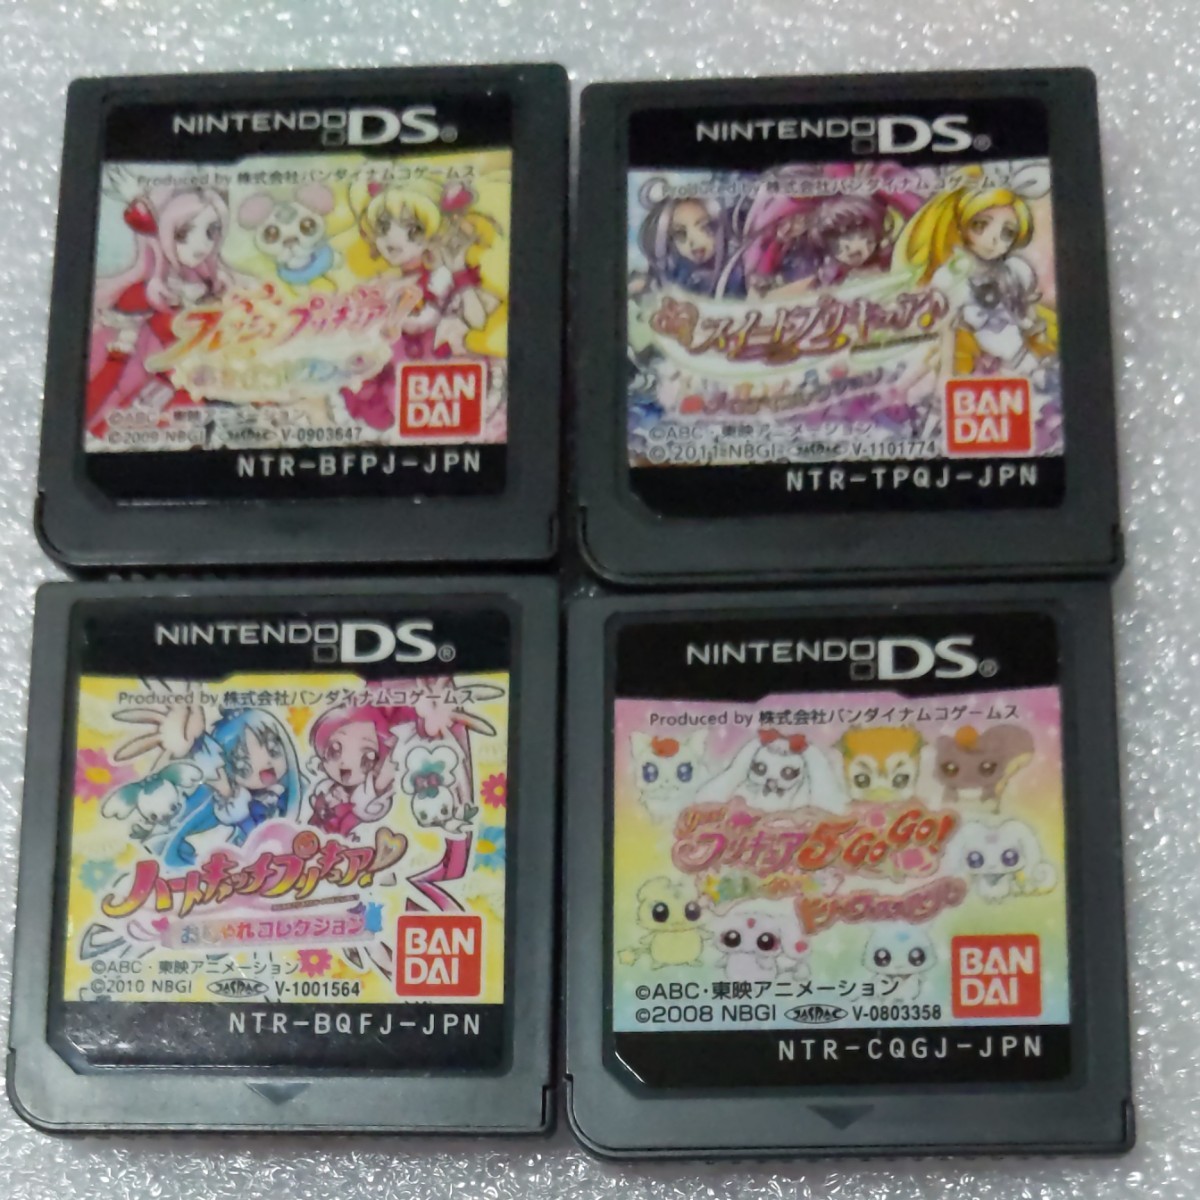 DSソフト プリキュアのゲームソフト4本セット販売